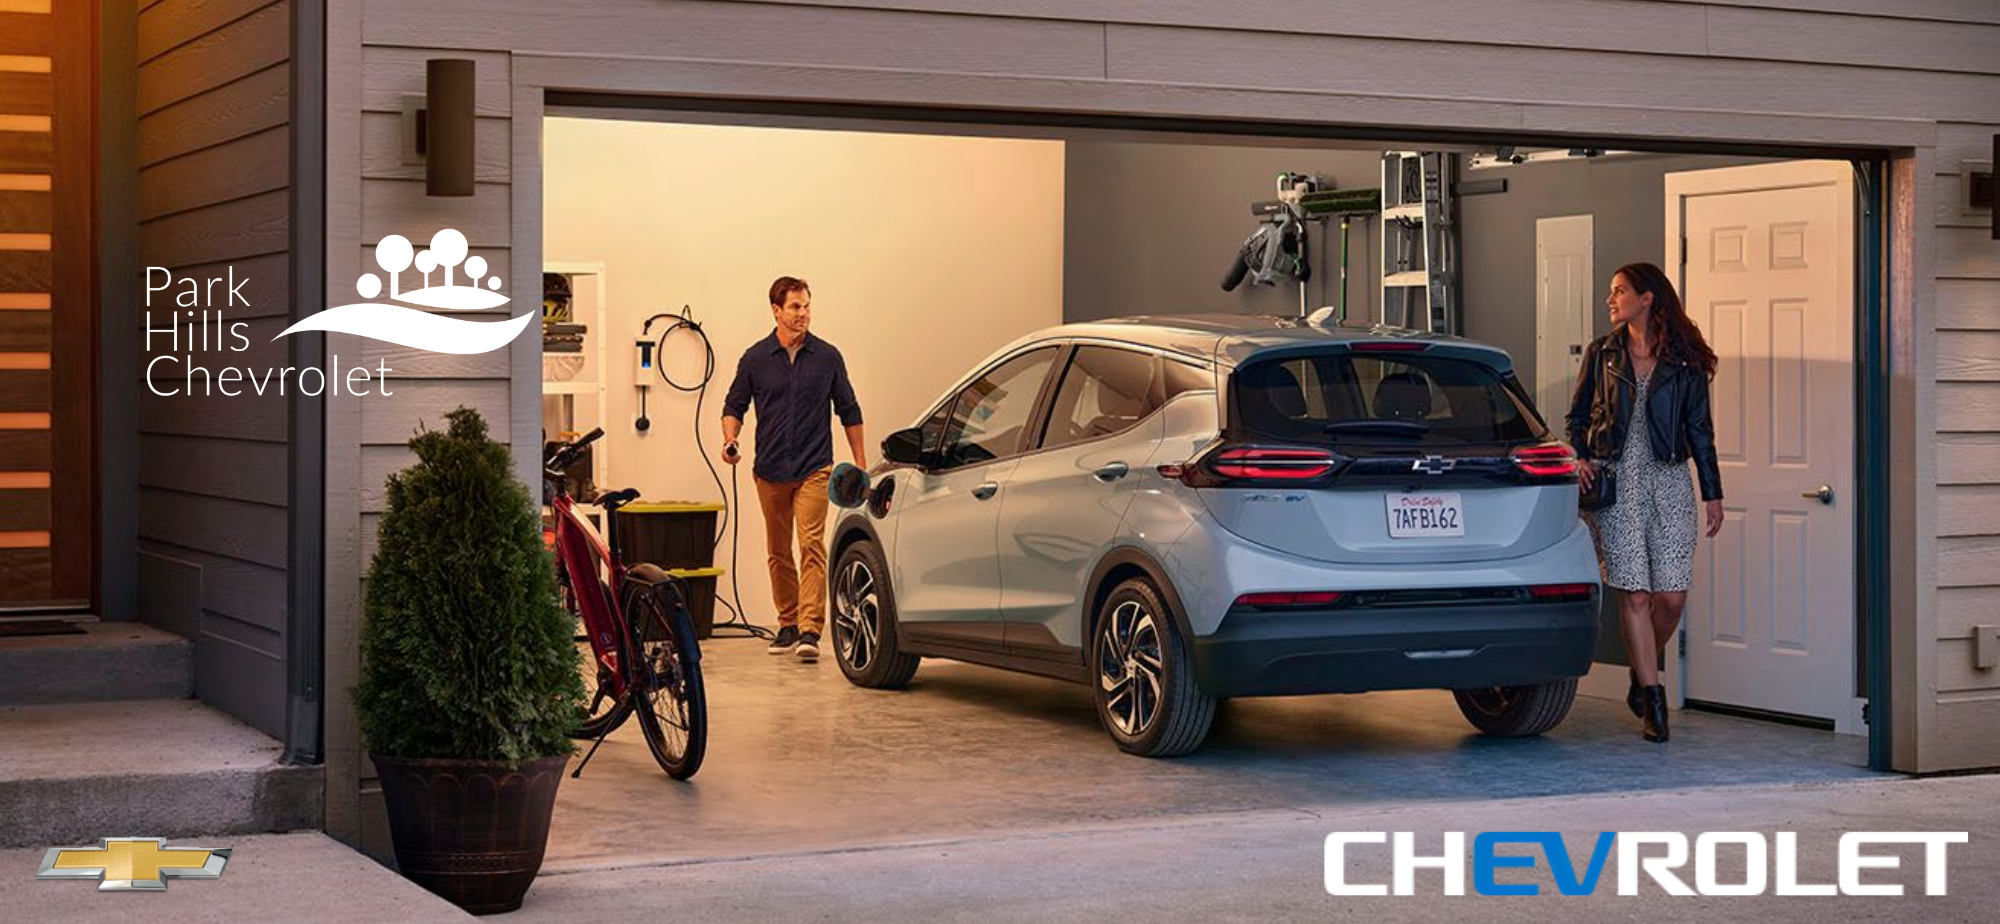 Chevrolet Electric Vehicles | Park Hills Chevrolet in Park Hills MO